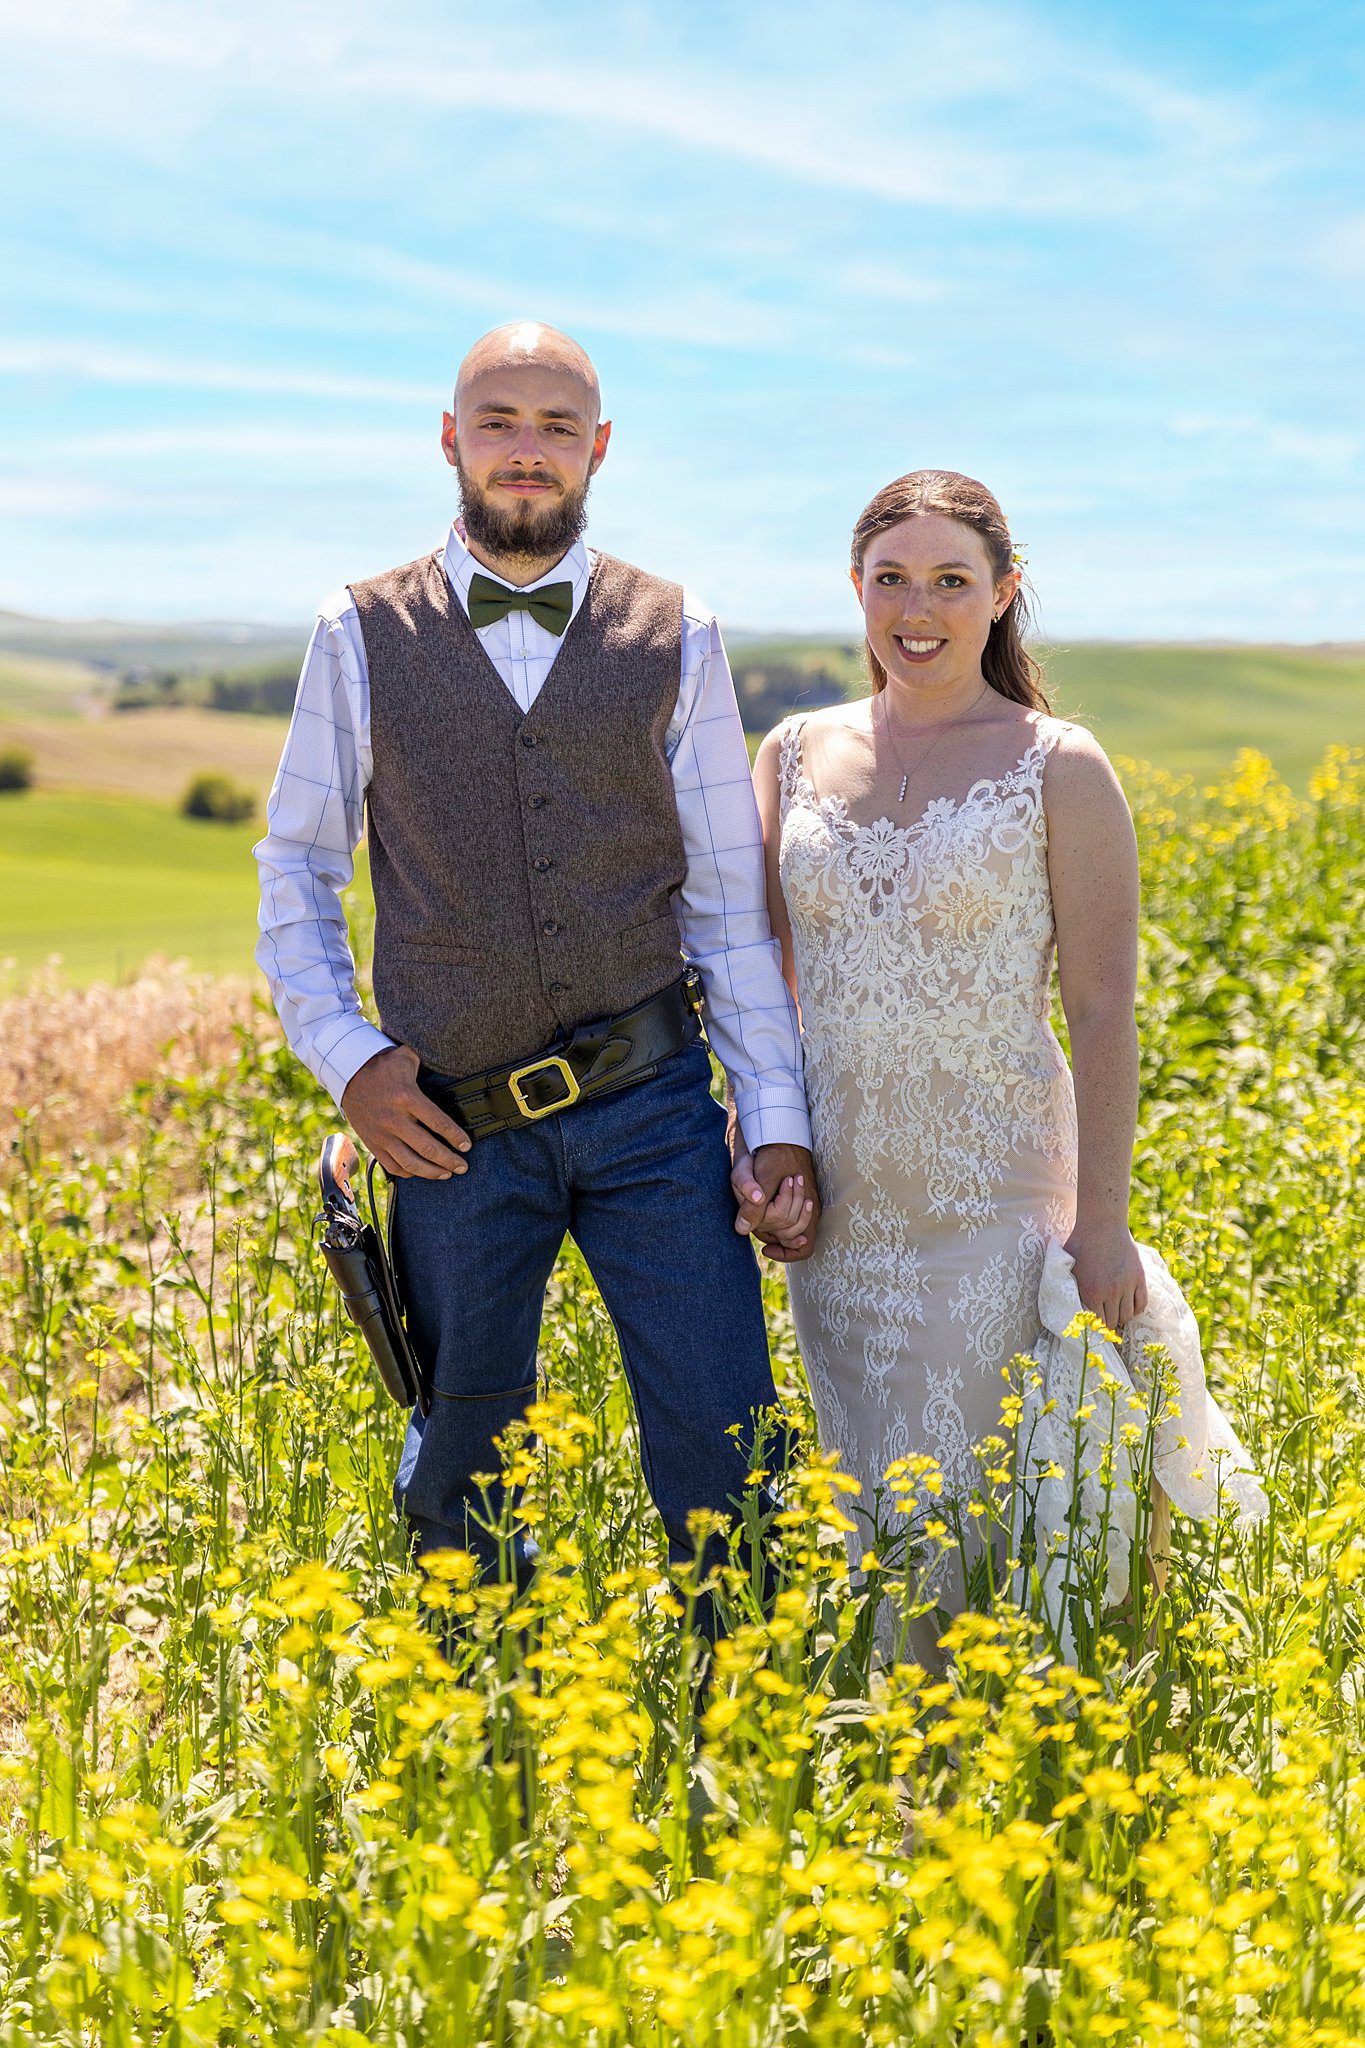 Newlyweds stand in a field of wildflowers holding hands wearing a lace wedding gown and a brown vest with a gun holster silverbell wedding